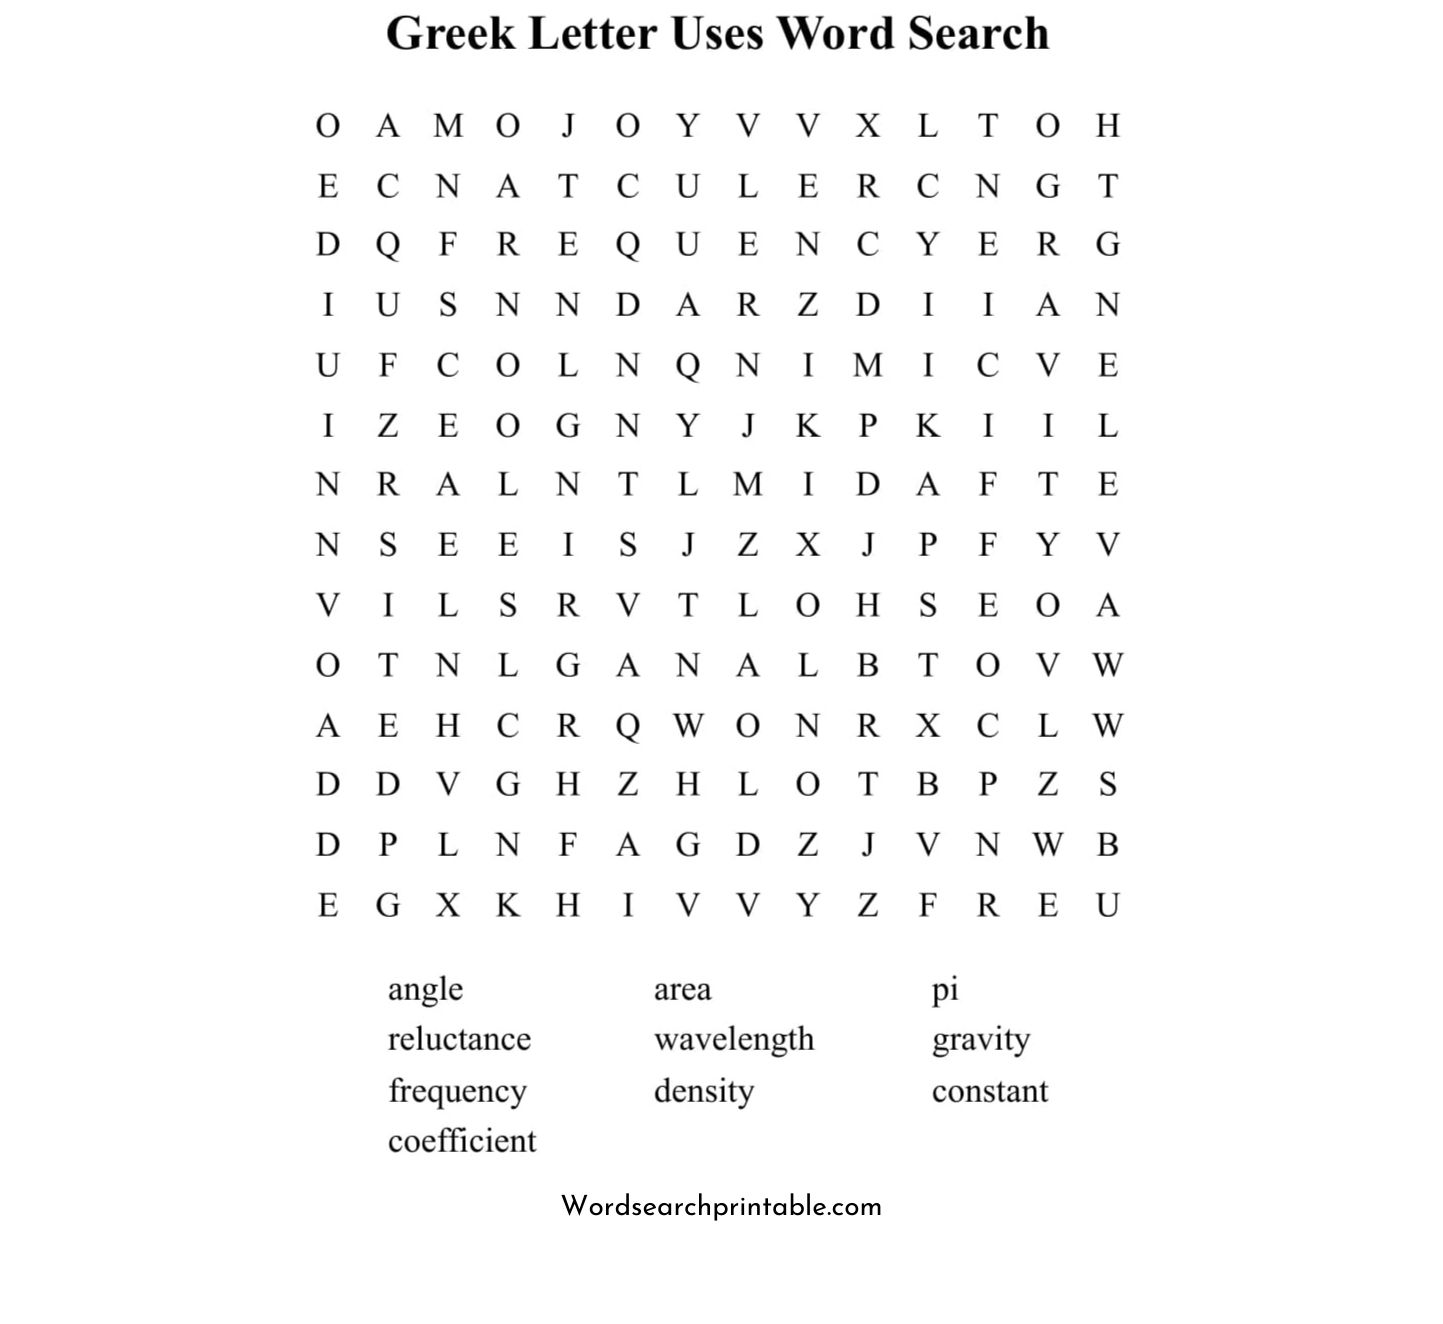 greek letter uses word search puzzle